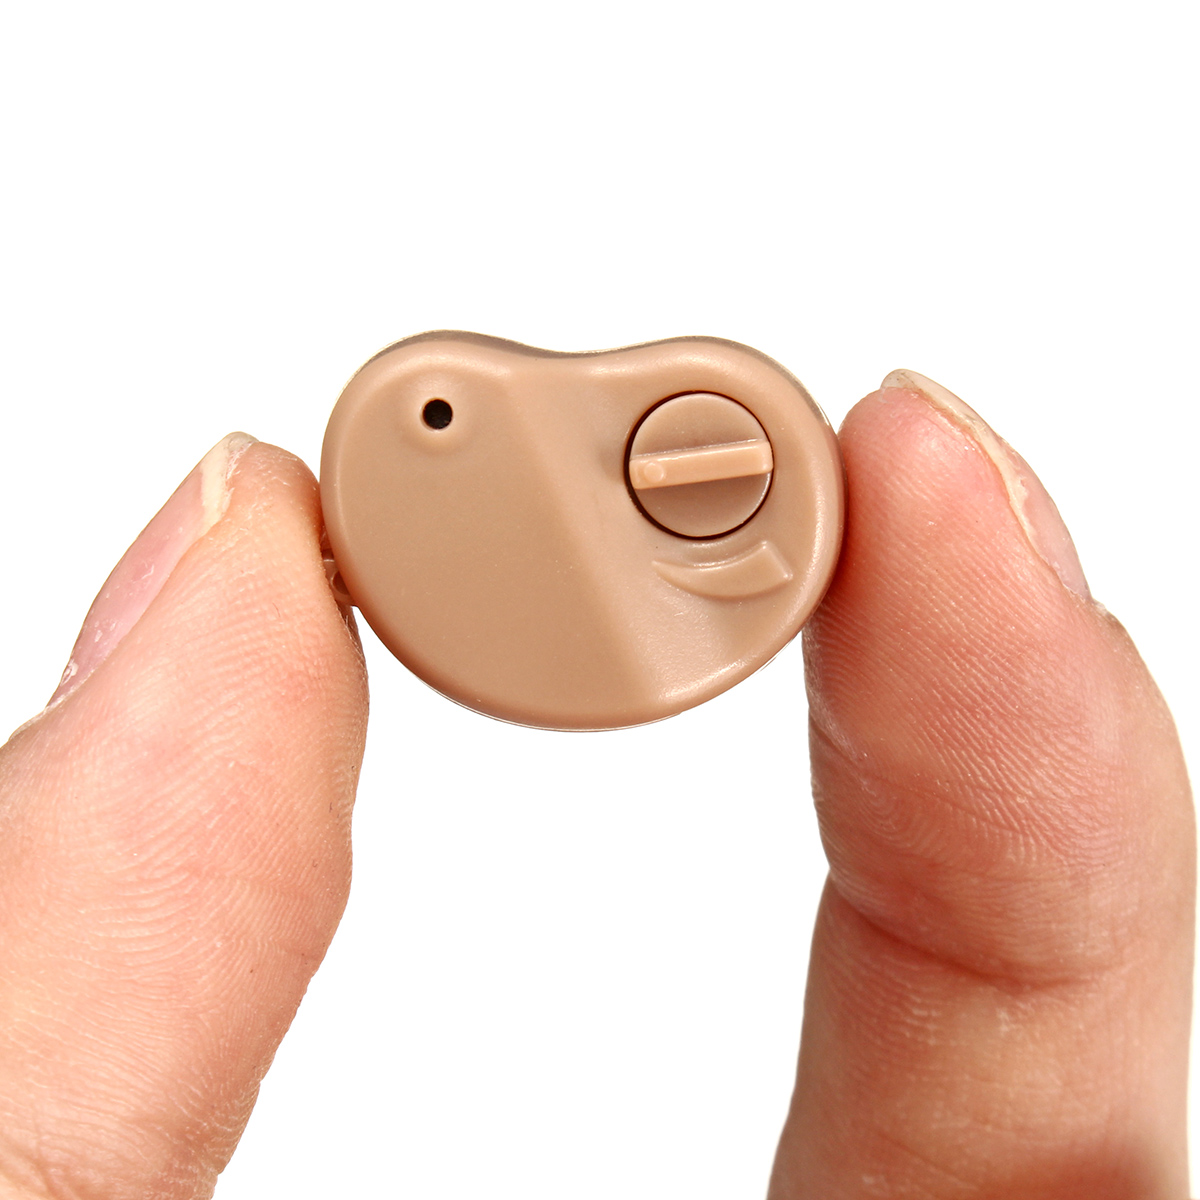 Adjustable Digital Hearing Aids Mini In-Ear Best Sound Voice Amplifier Invisible 25